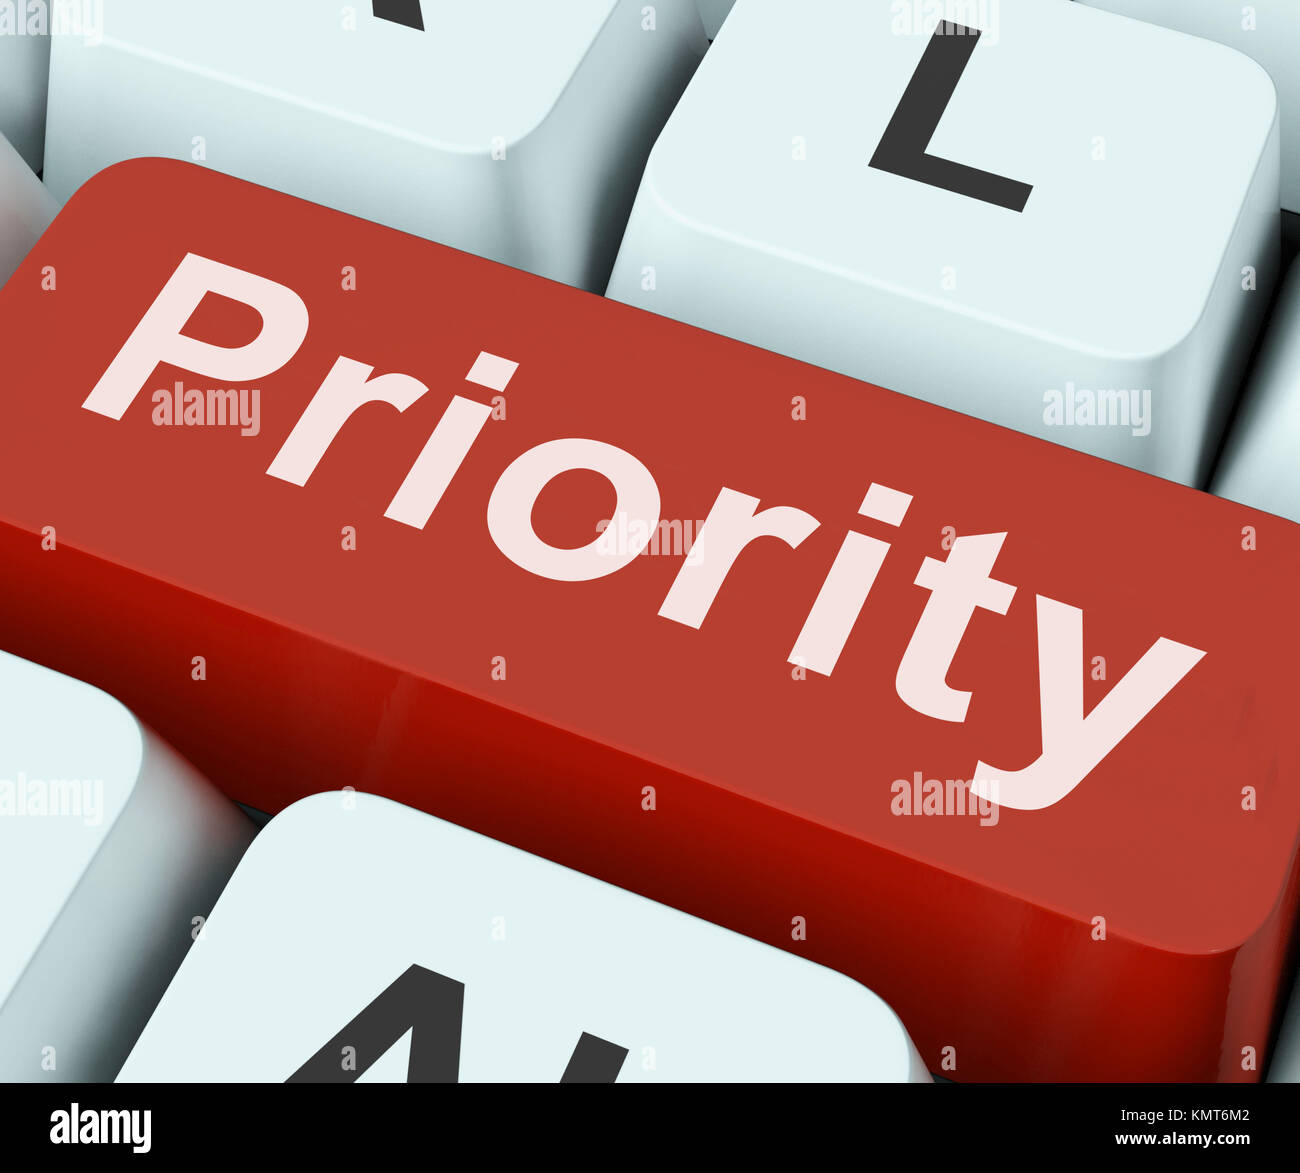 Priority Key On Keyboard Meaning Preference Greater Importance Or Primacy Stock Photo